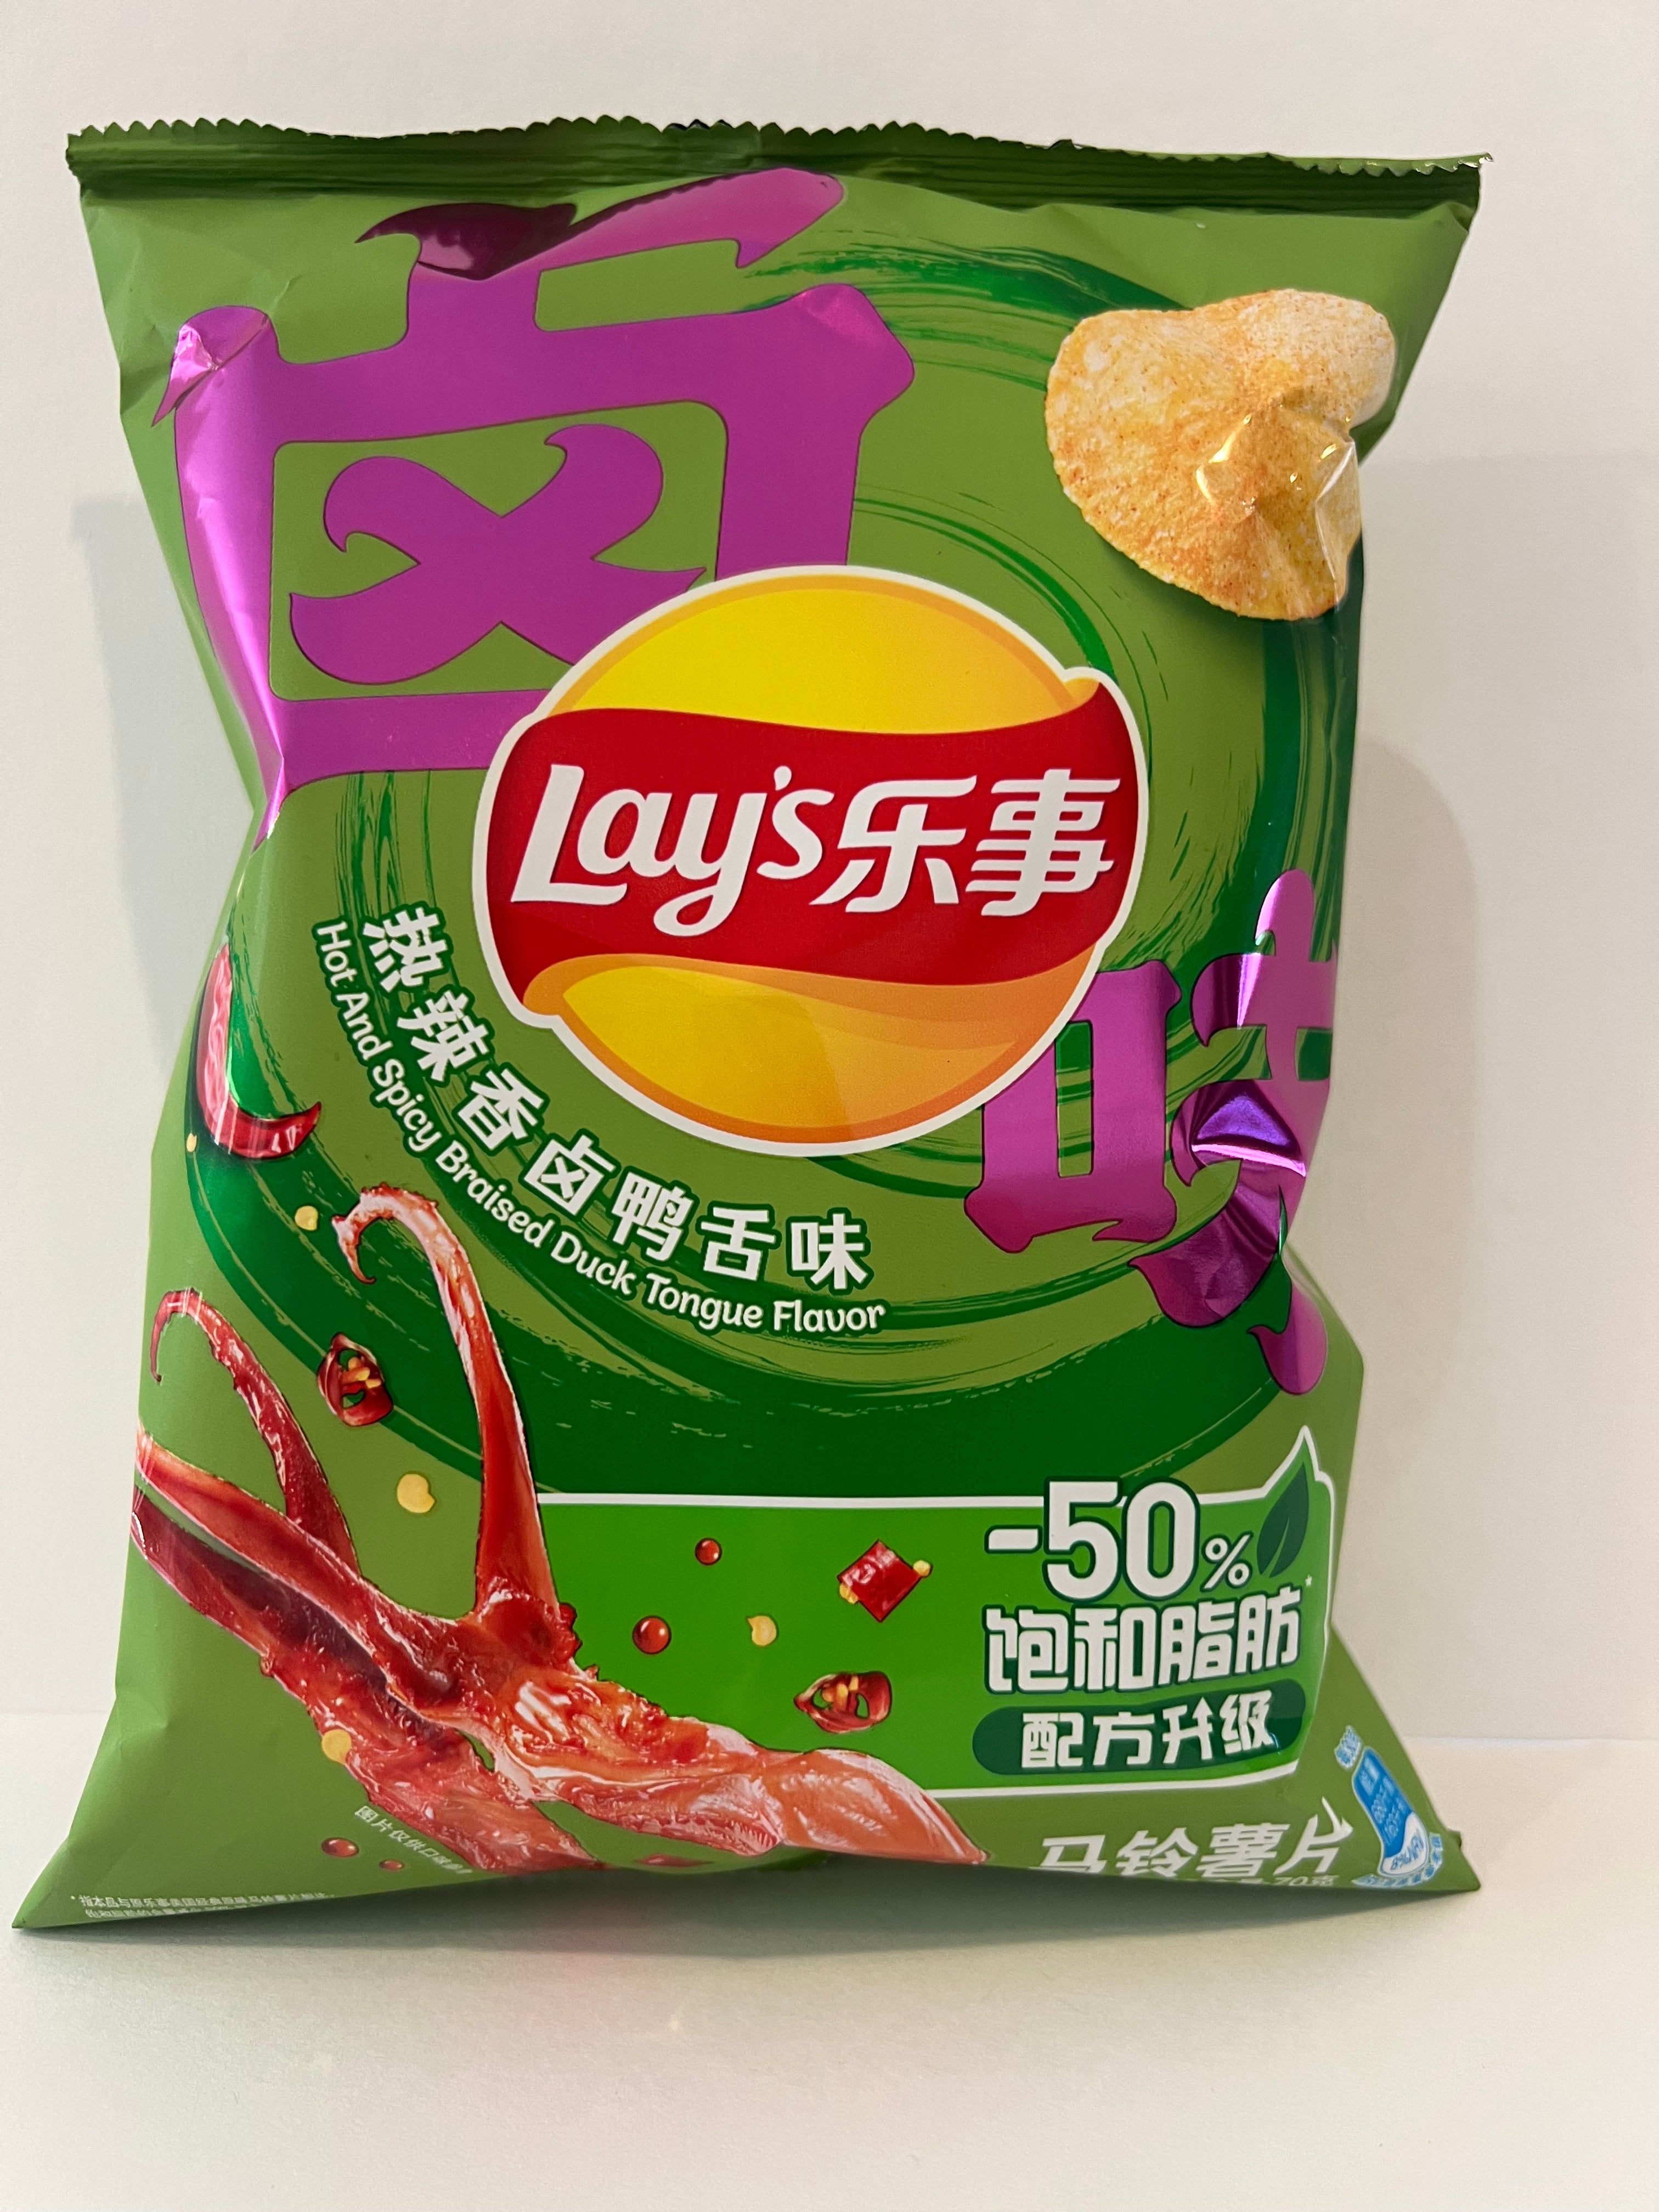 Lay's Hot and spicy braised duck tongue flavor